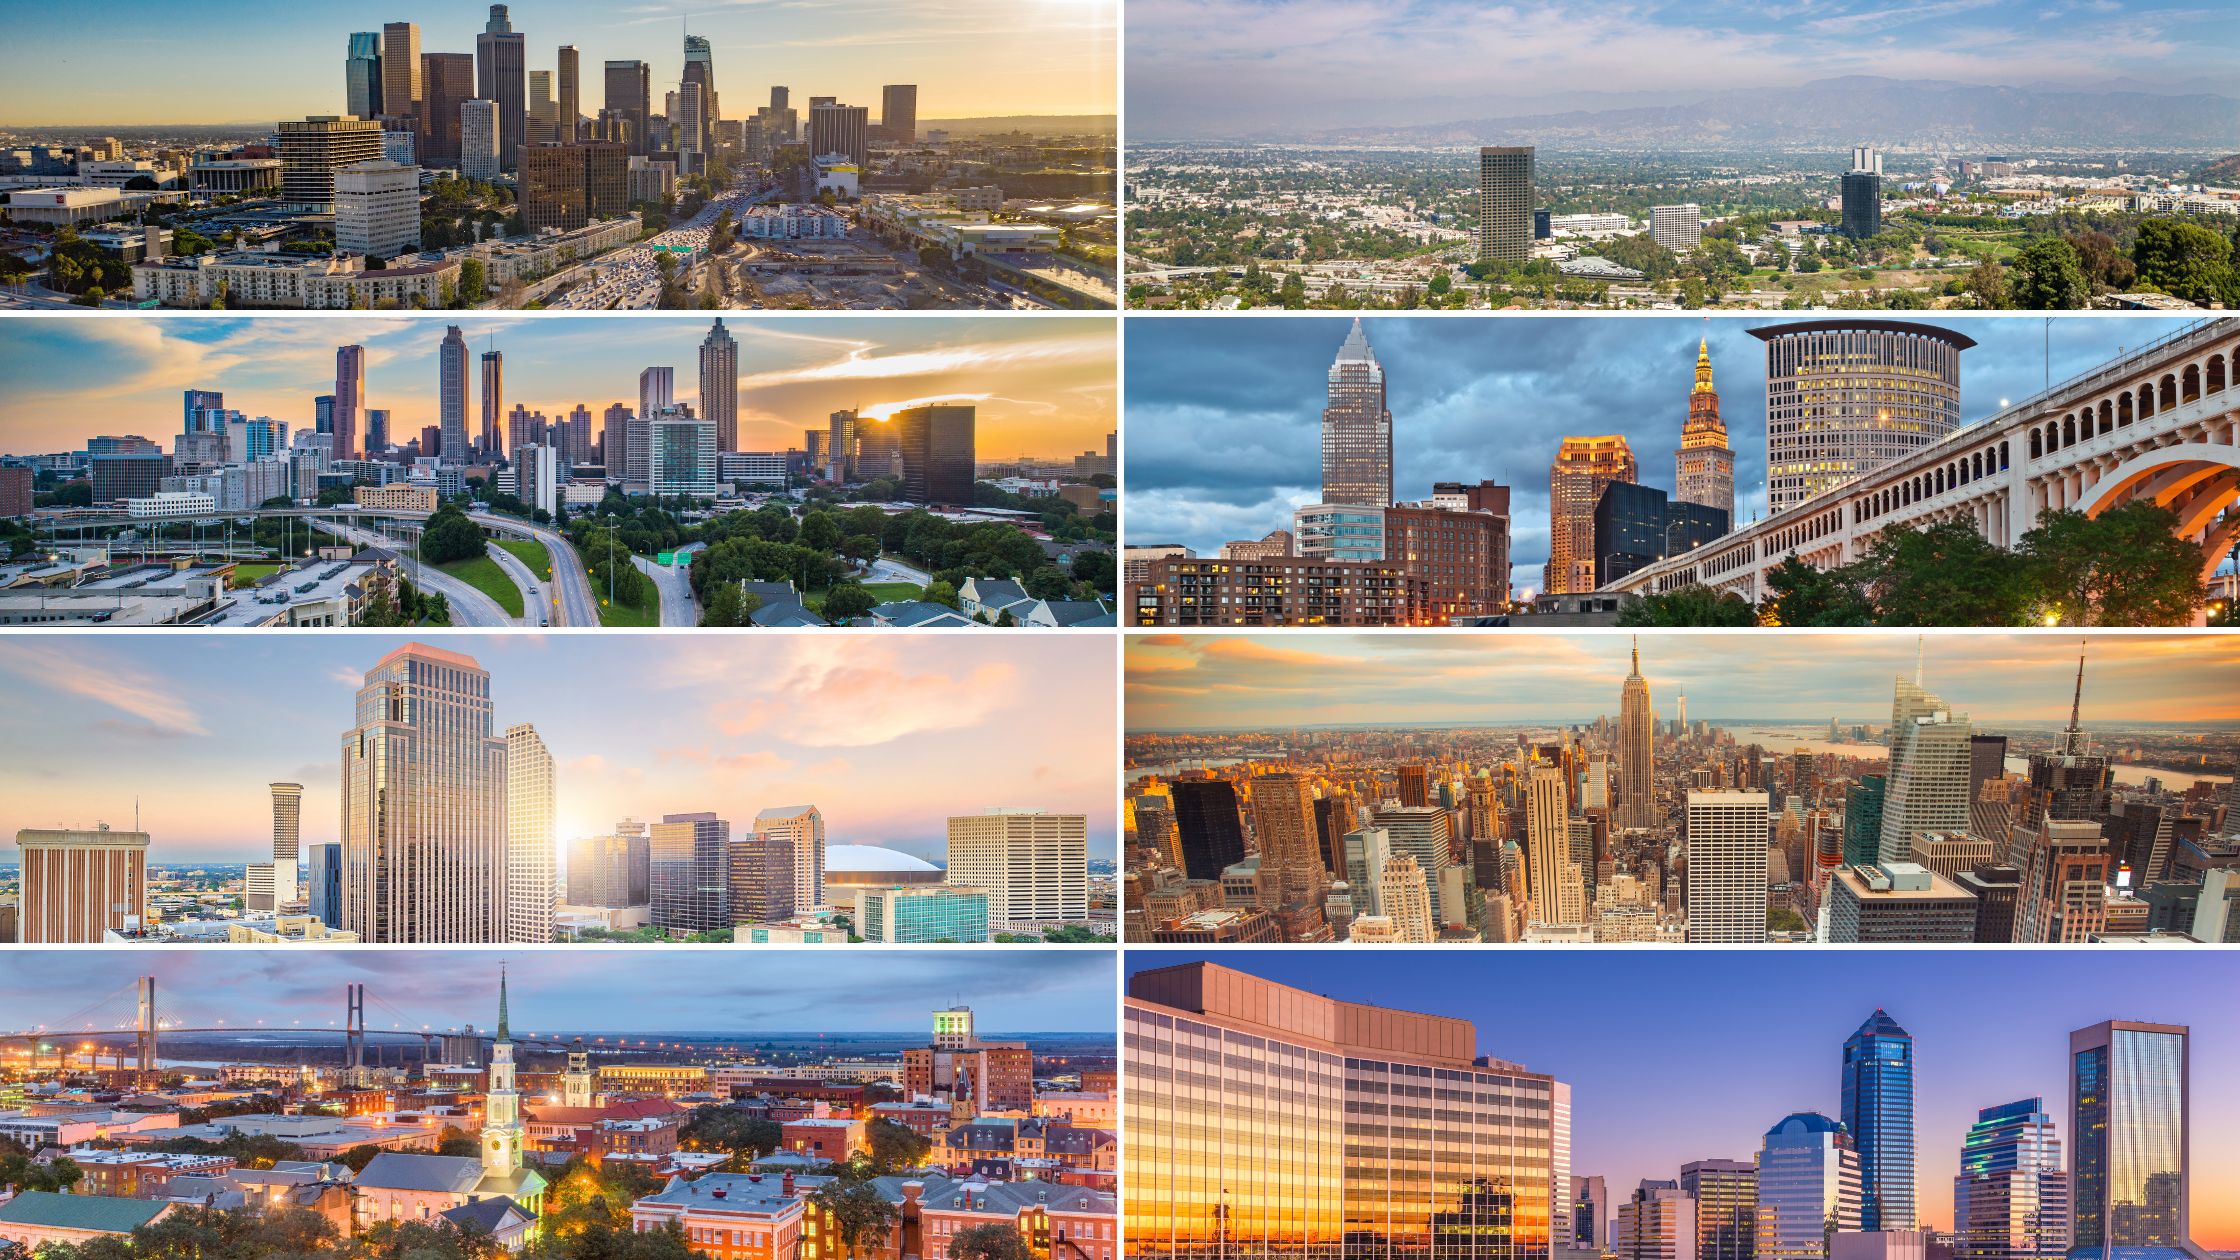 Cityscapes of Los Angeles, Los Angeles County, Savannah, New Orleans, New York City, Atlanta, Cleveland, and Jacksonville.